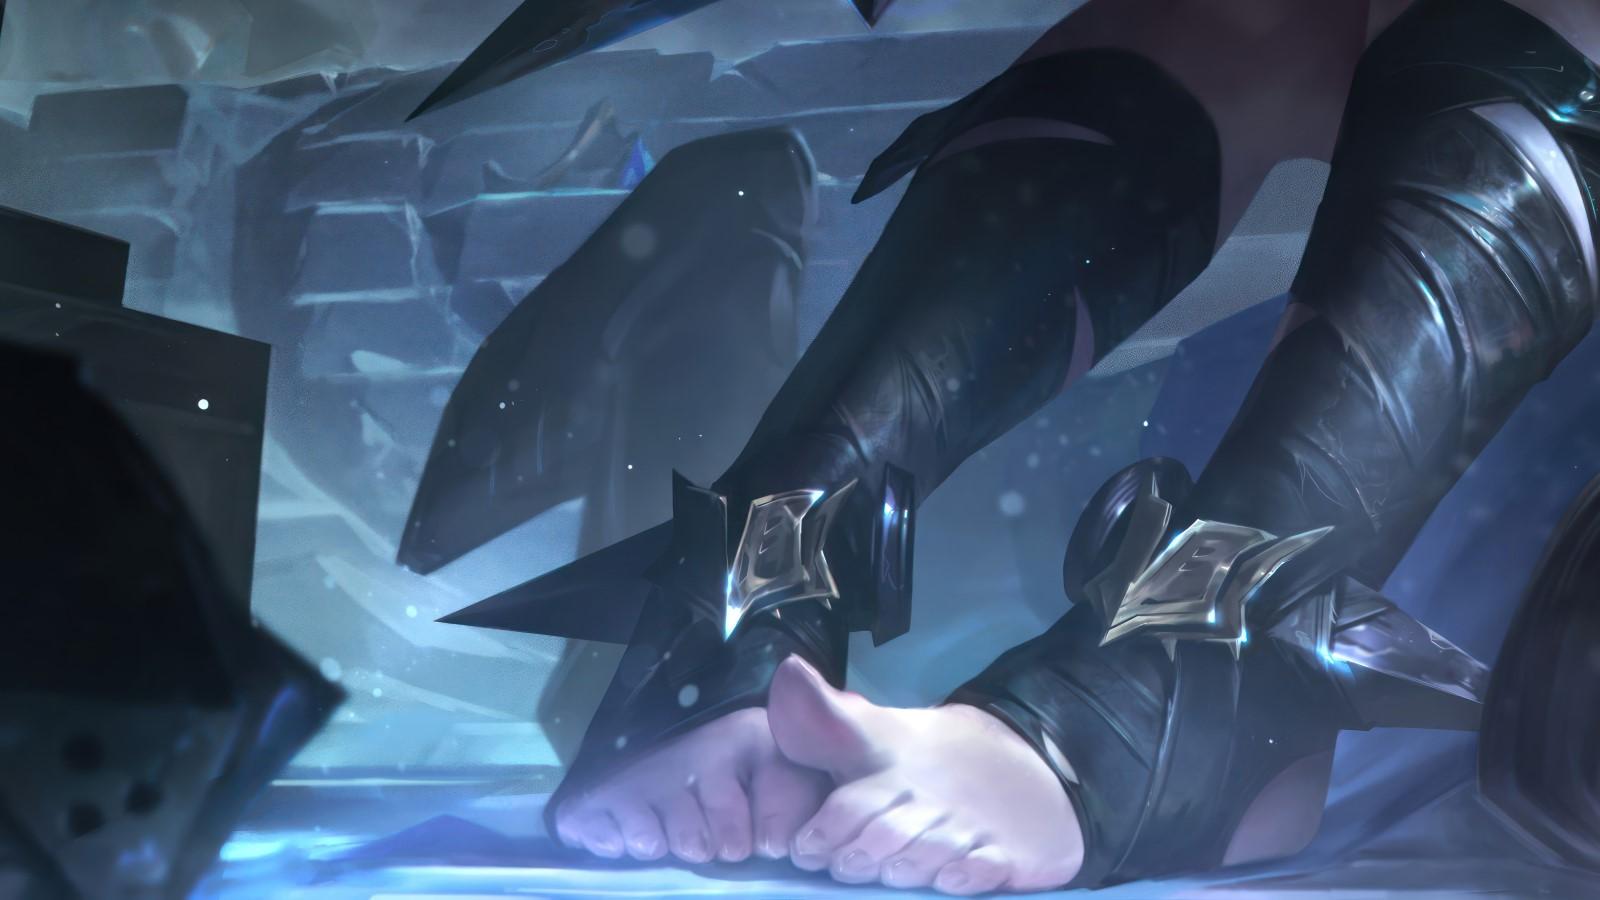 League of Legends Briar nerfs are coming as newcomer finds her feet